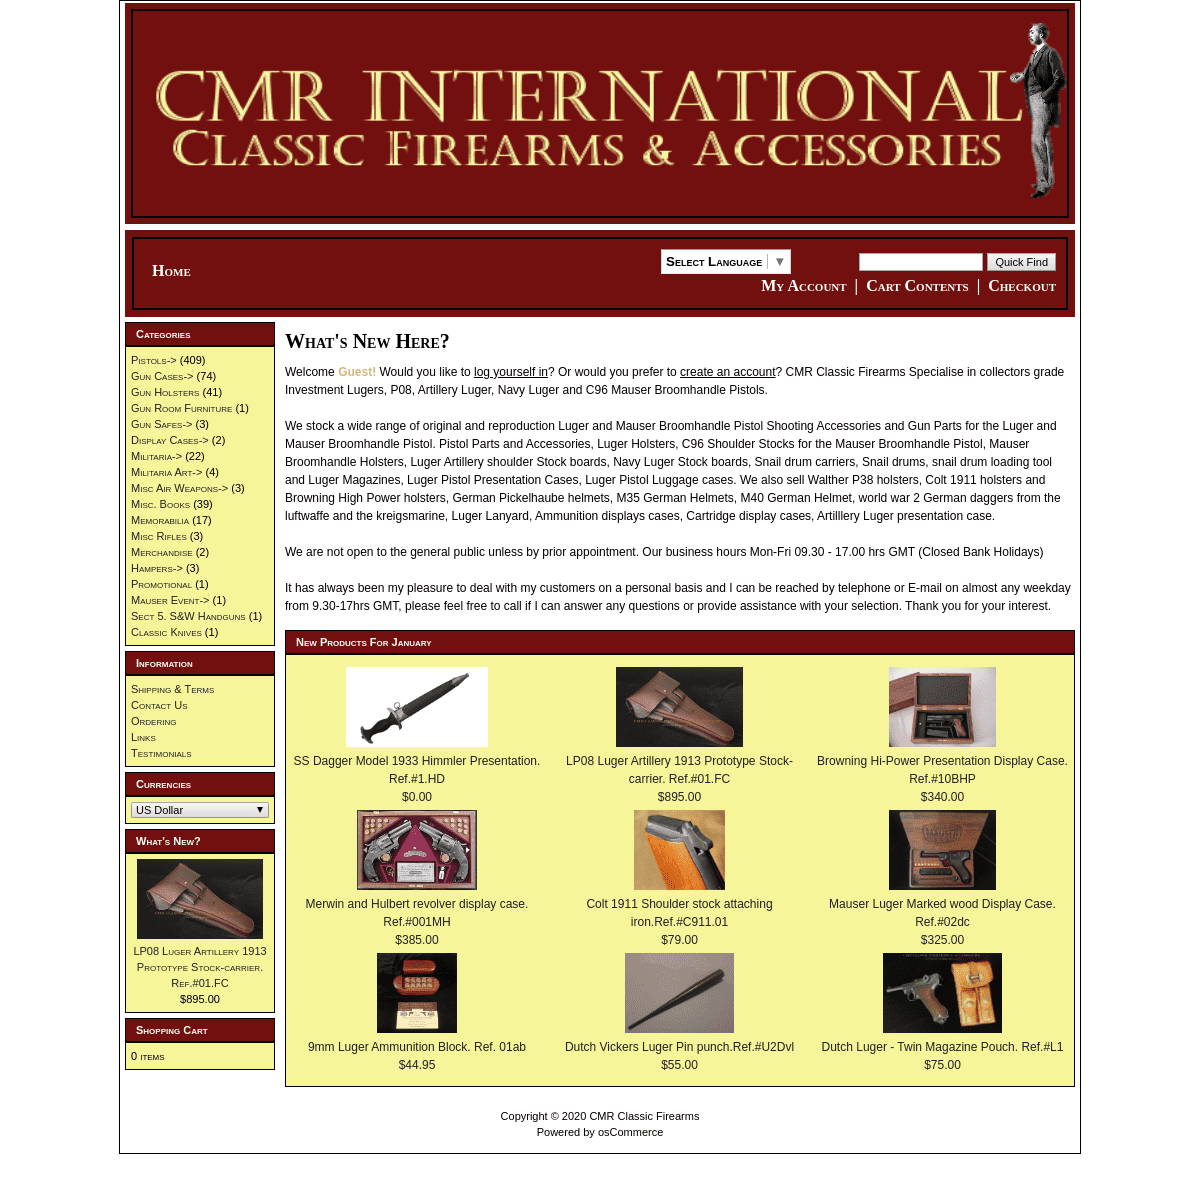 A complete backup of cmrfirearms.com